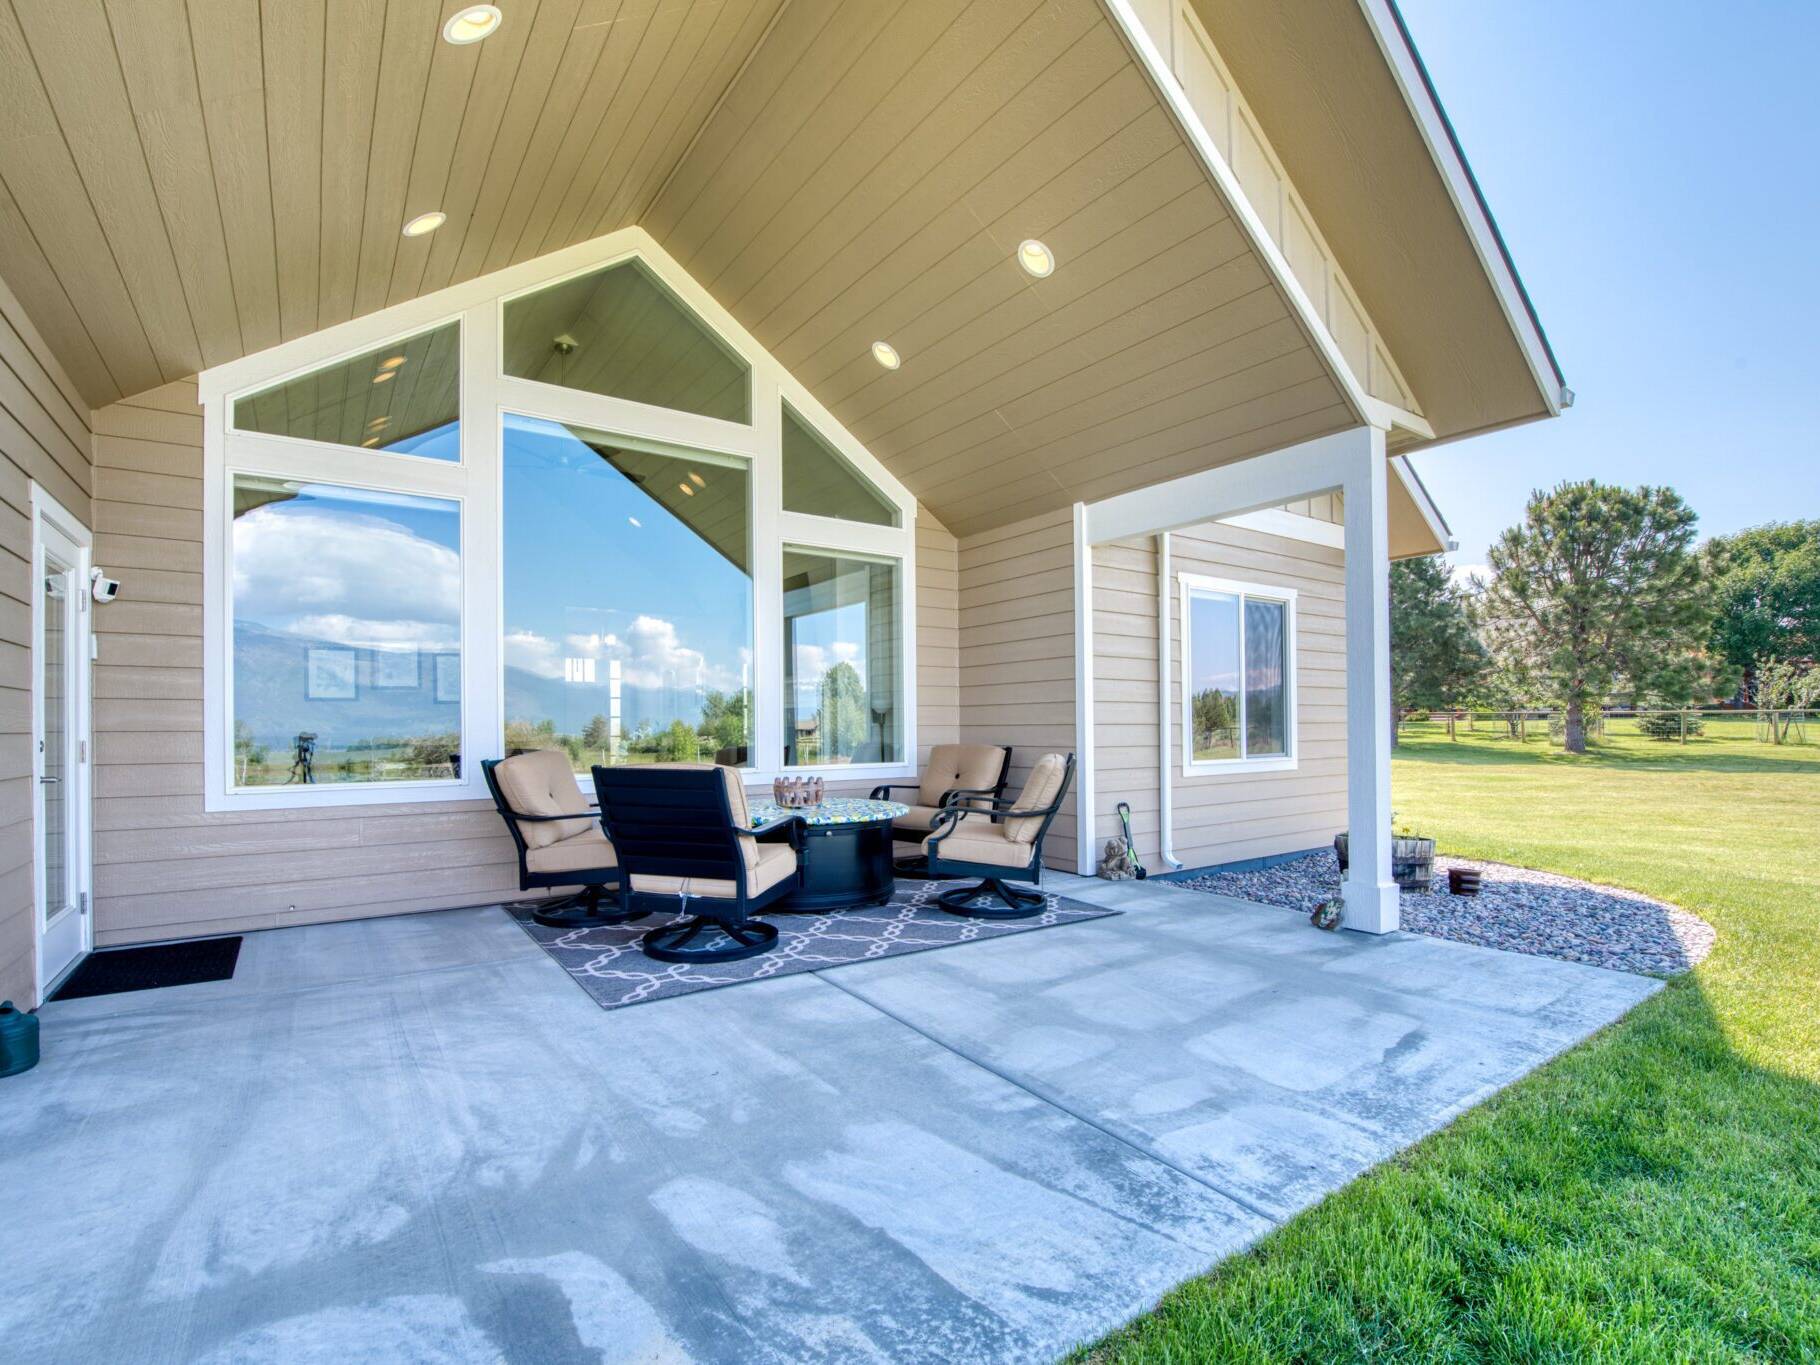 Covered back patio with vaulted ceiling overlooking the Bitterroot Valley near Hamilton, MT - Built by Big Sky Builders of Montana